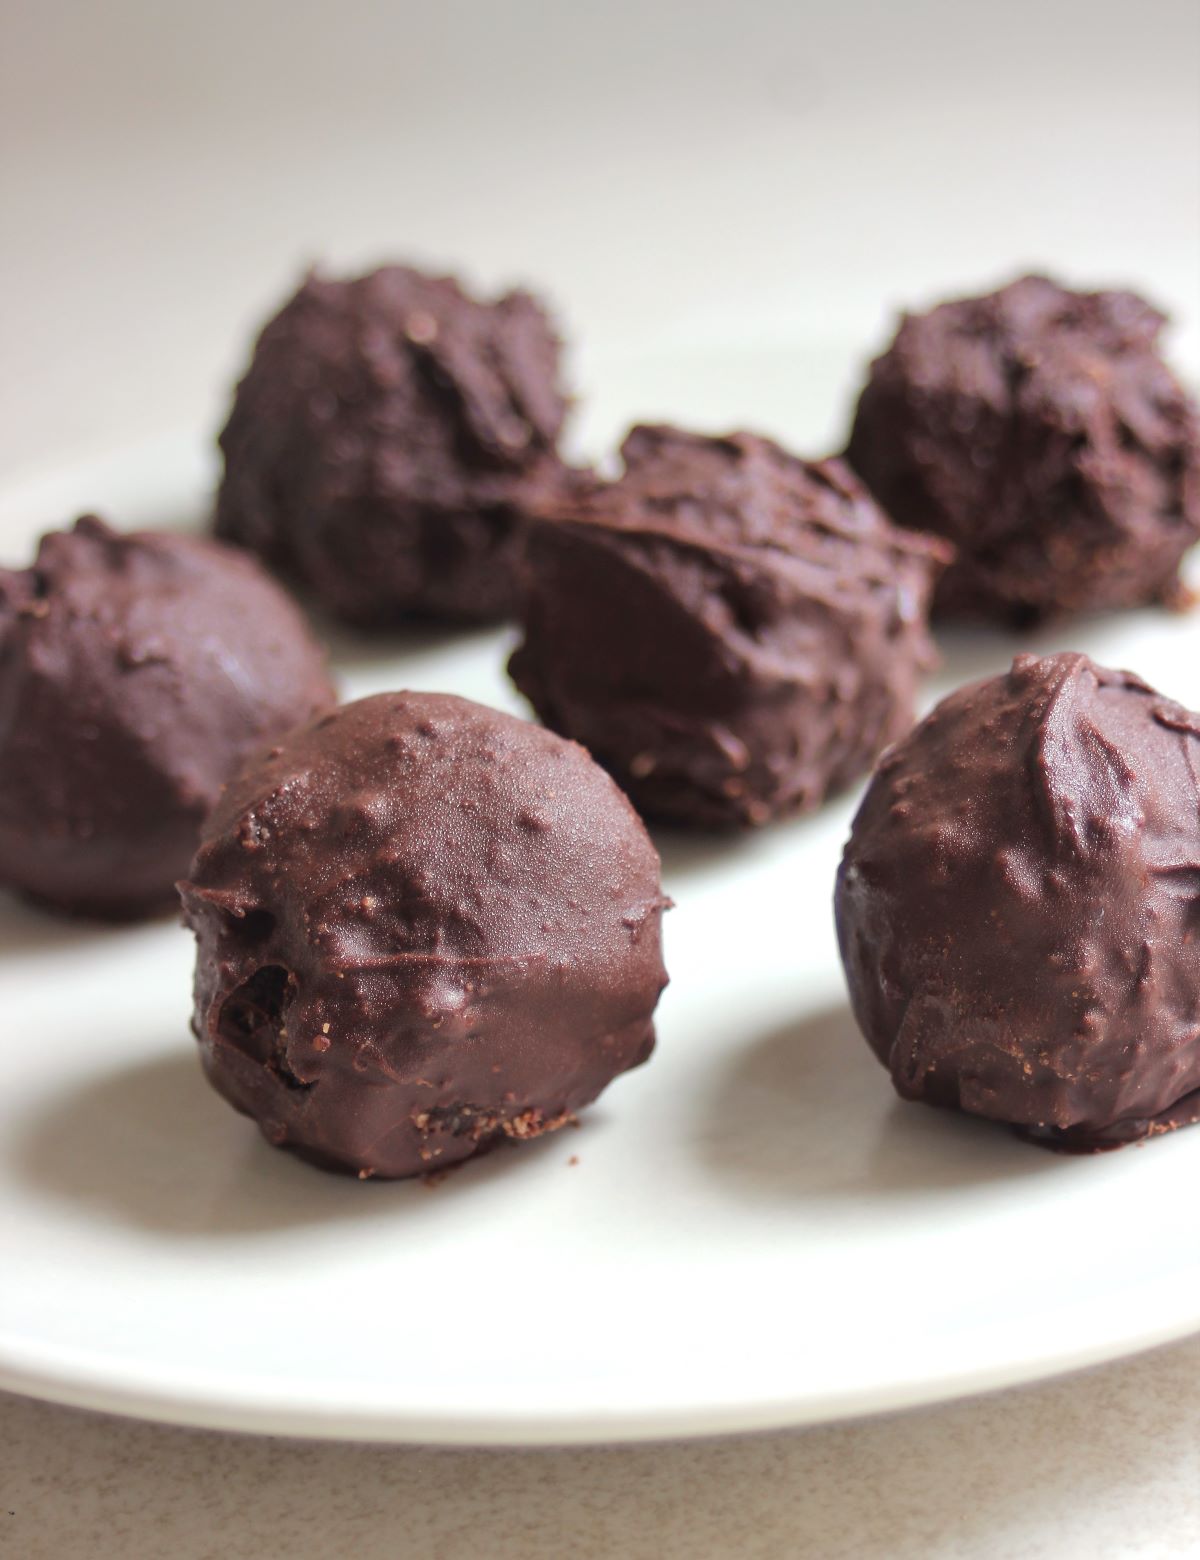 Chocolate peanut butter balls on a white plate.